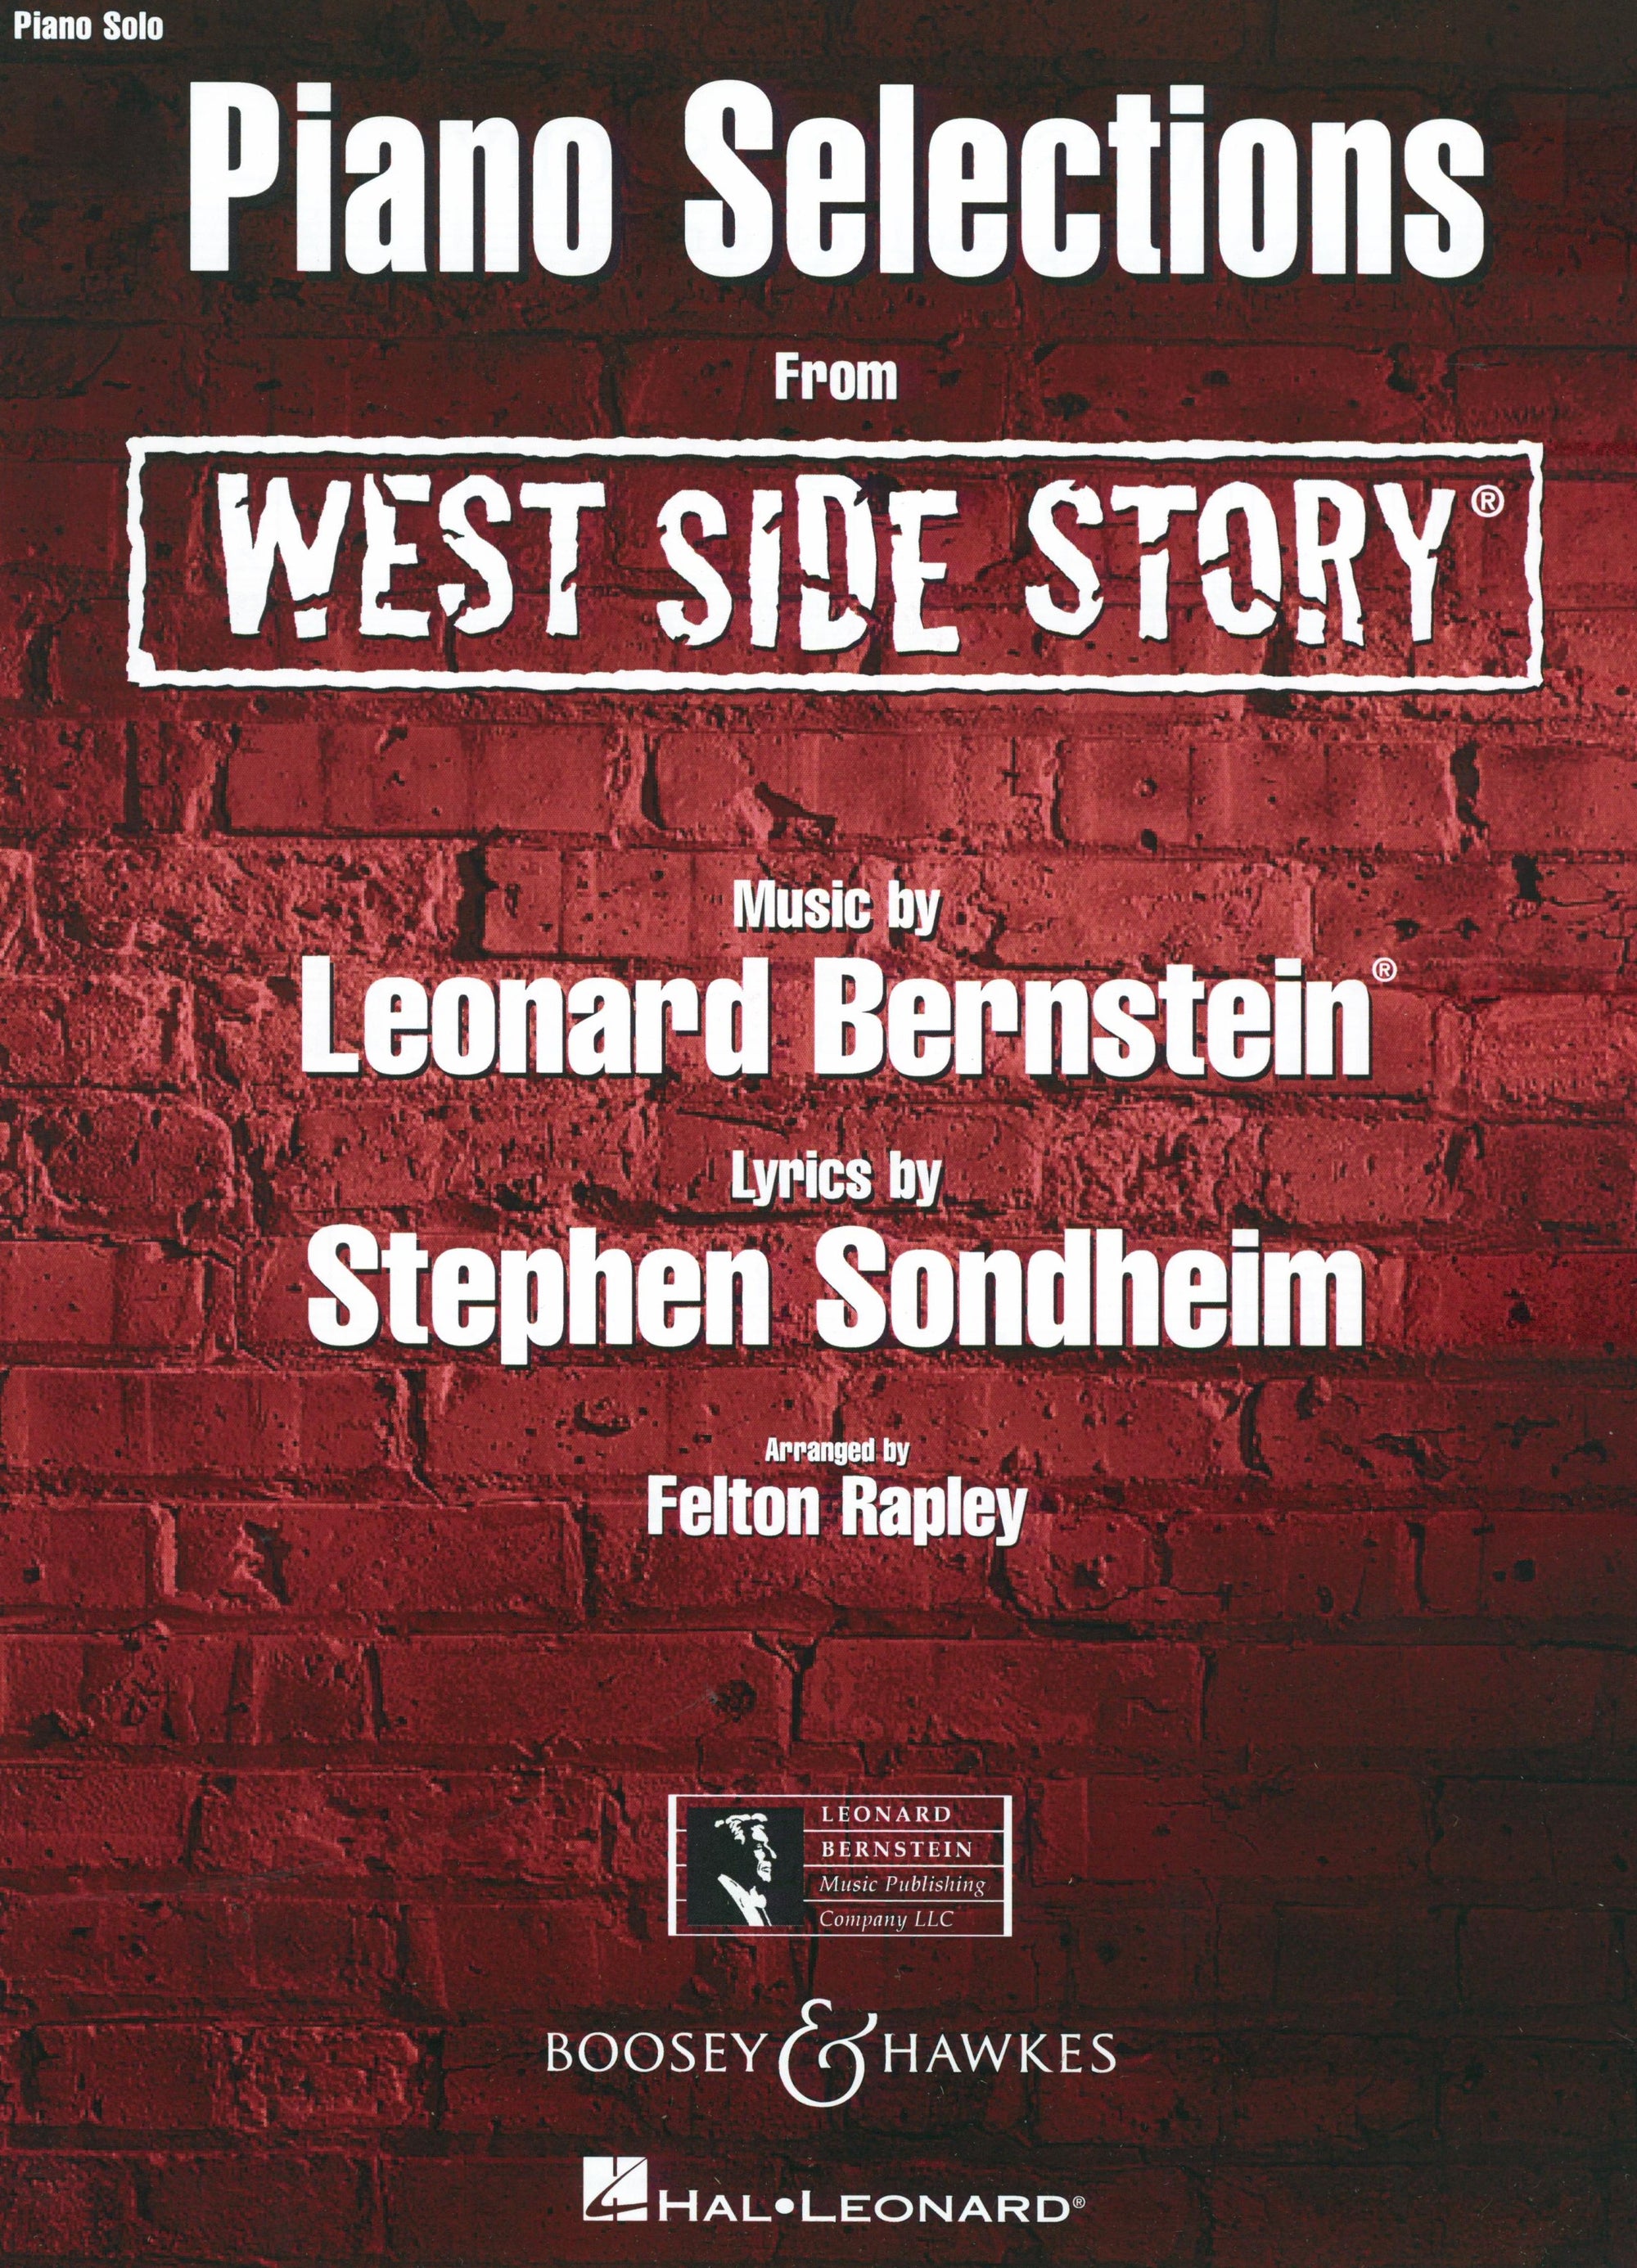 Piano Selections from West Side Story